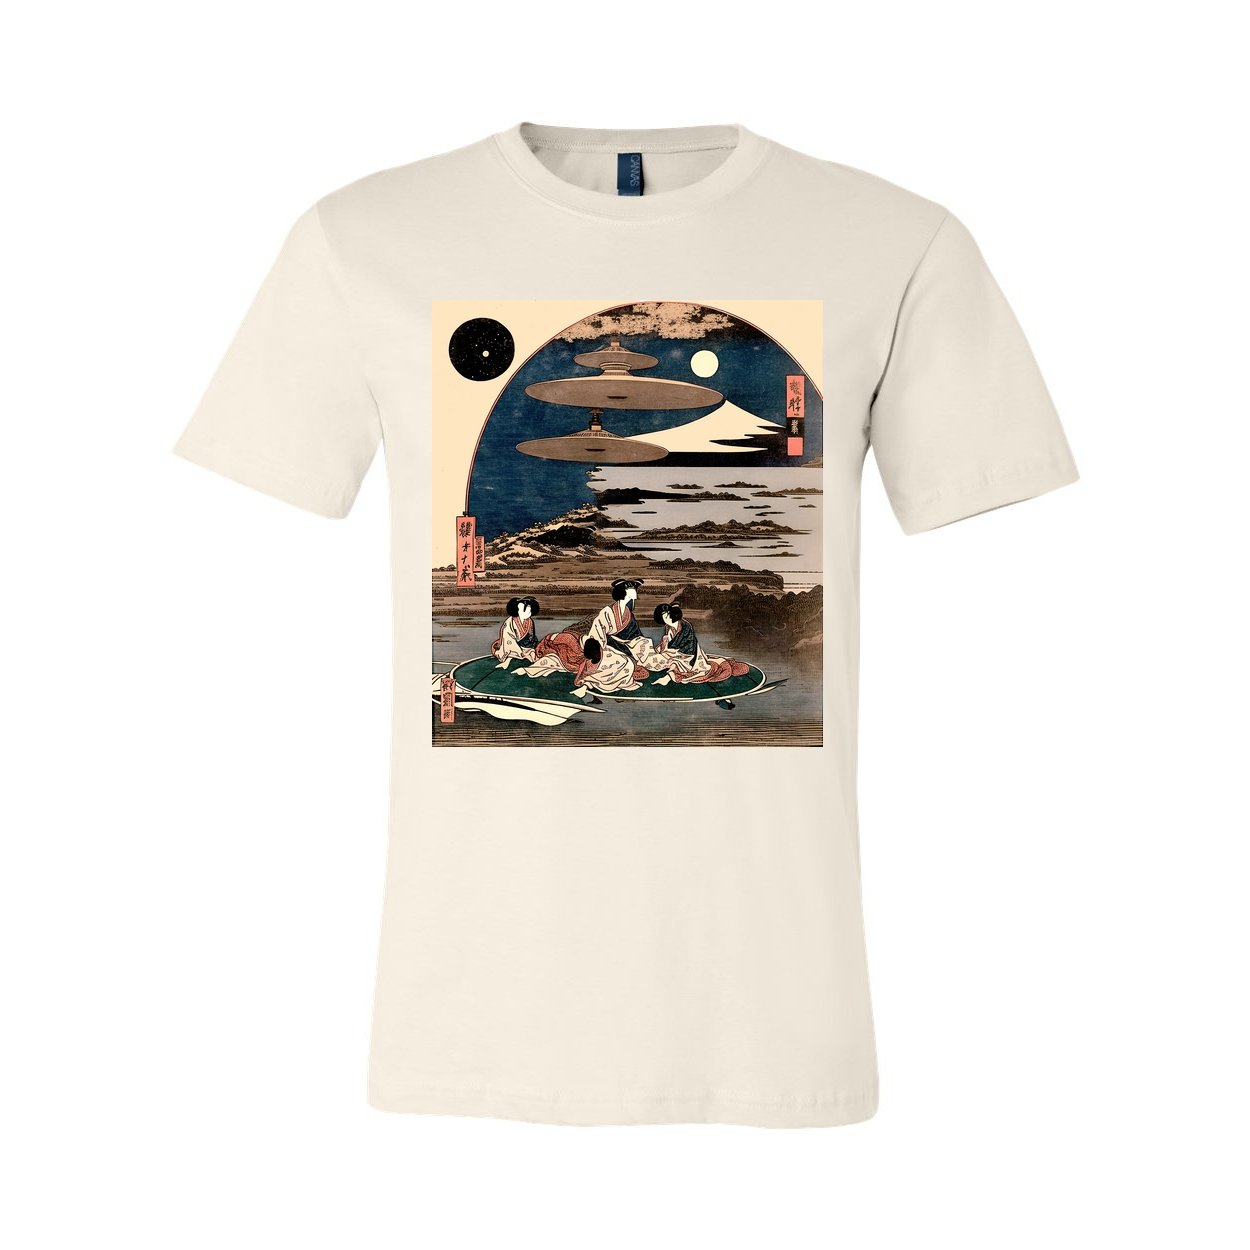 T-Shirts XS / Natural UFO Space Alien Invasion | Extraterrestrial Vintage Ukiyo-e 19th-Century Surreal Graphic Art T-Shirt